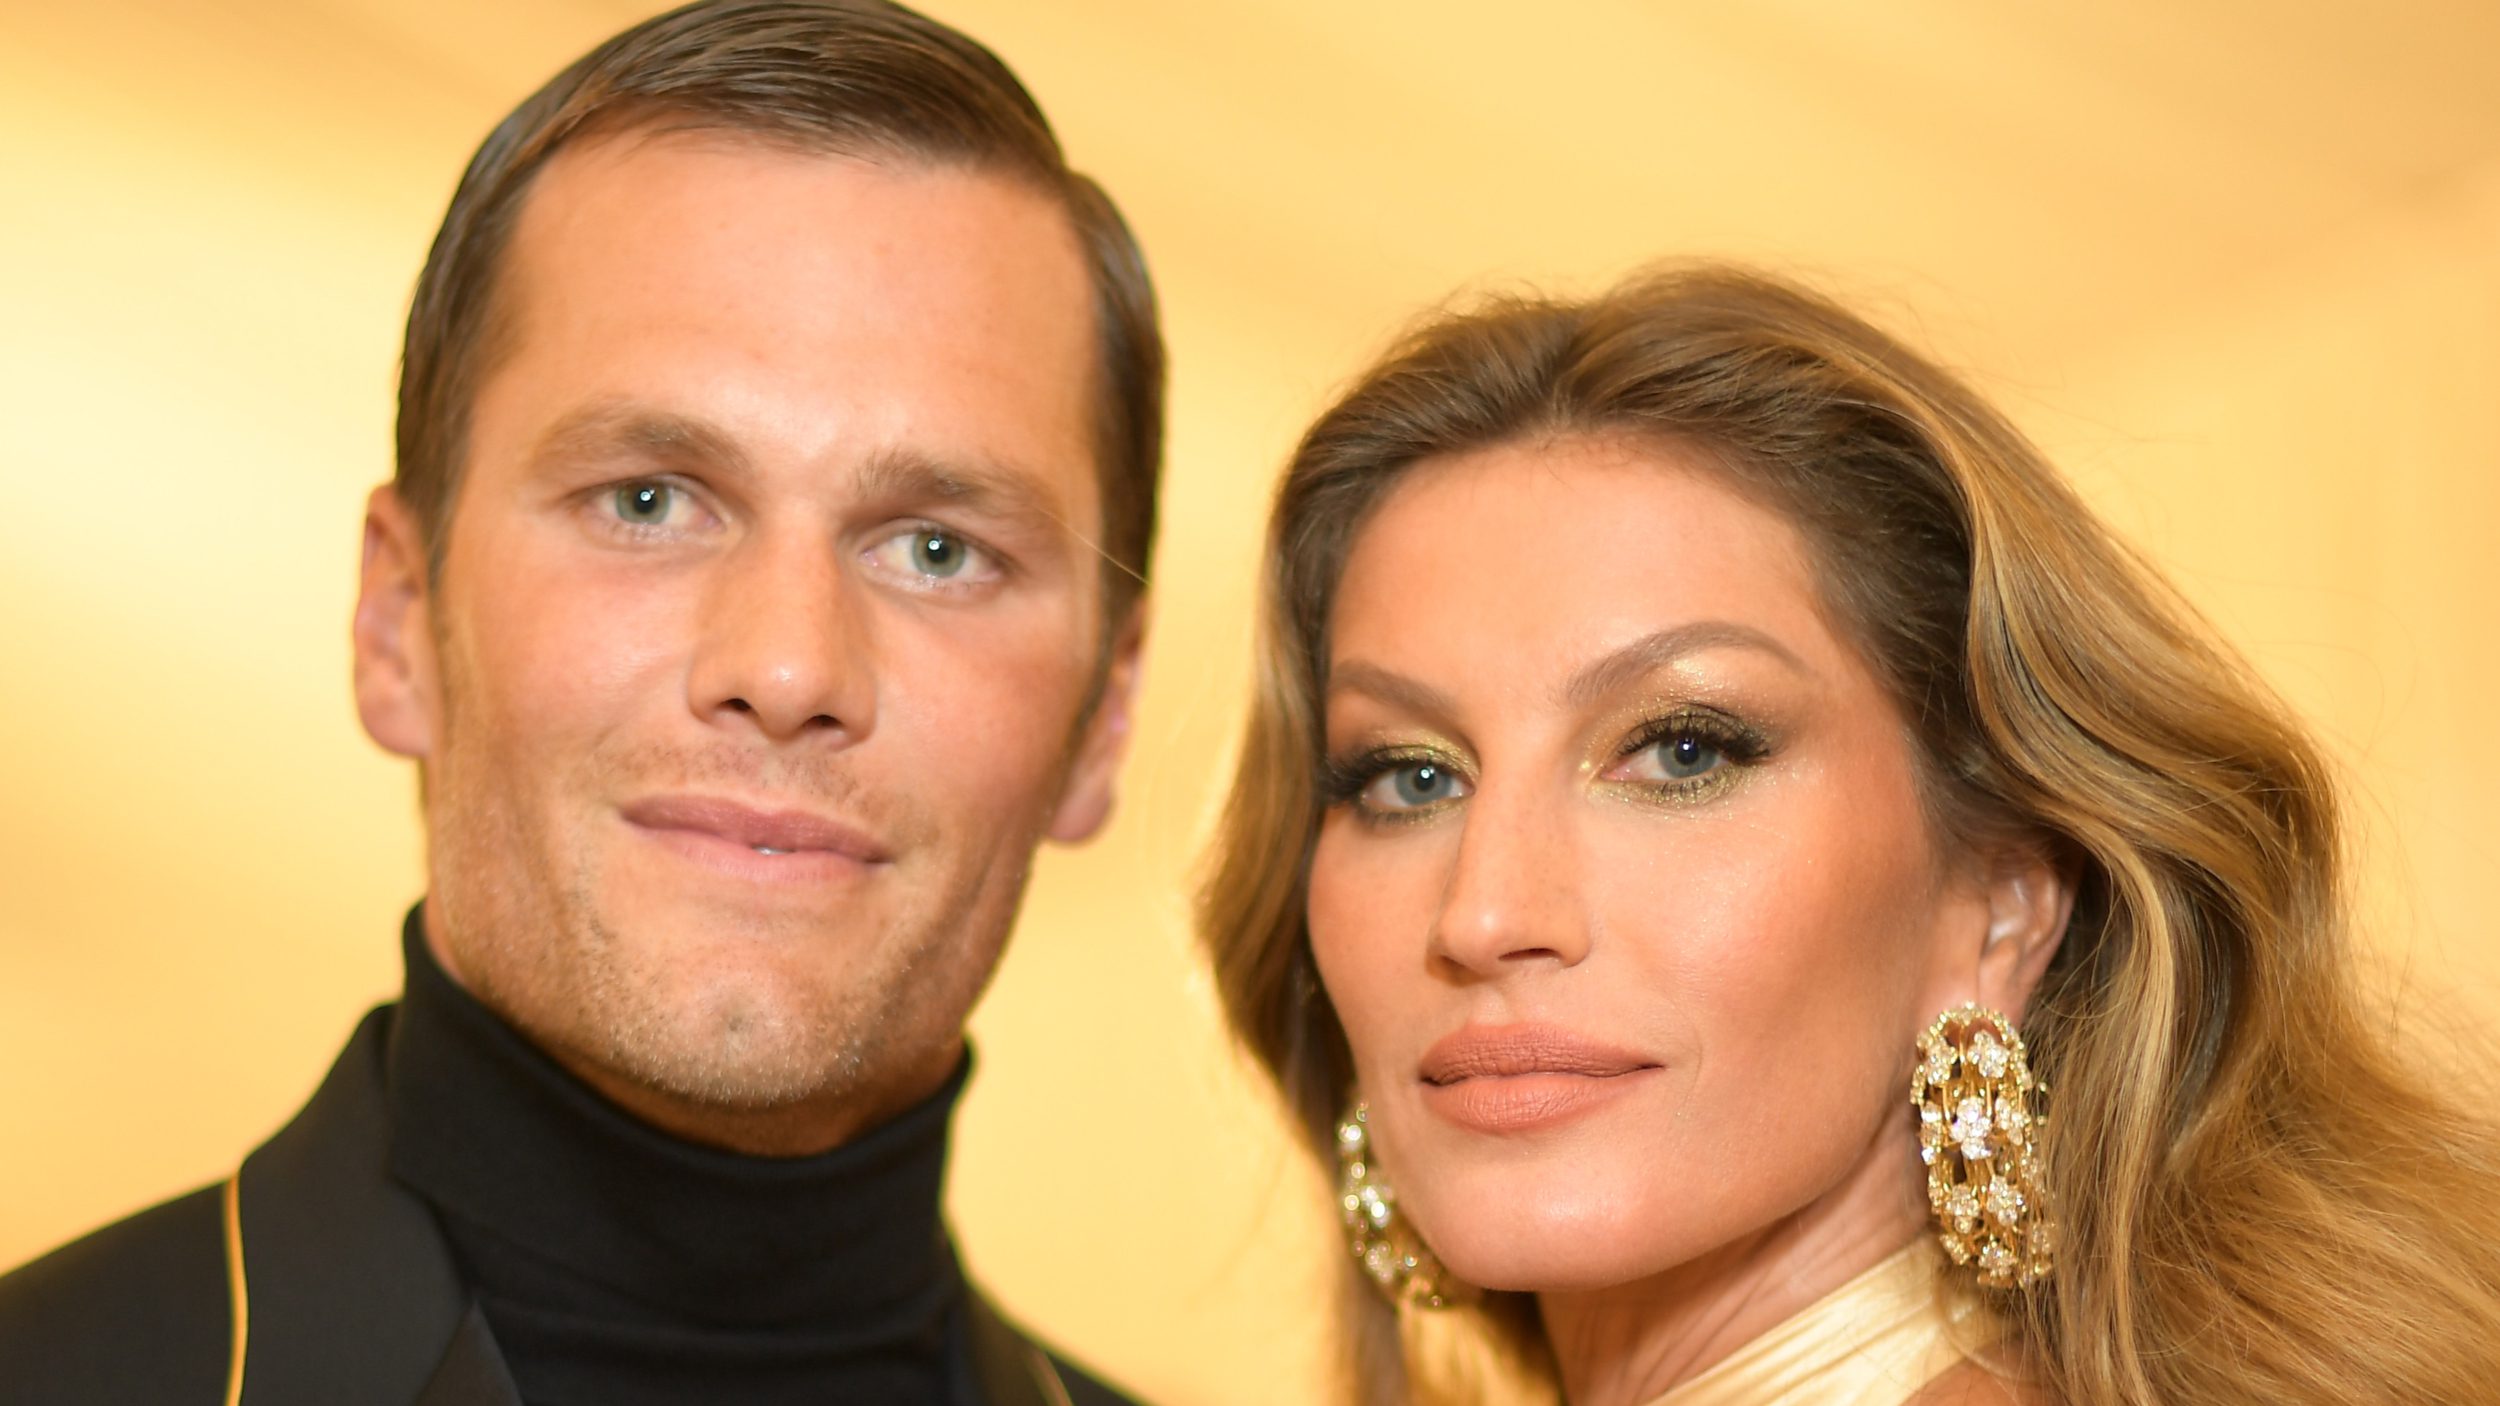 gisele-buendchen-rumored-to-have-new-boyfriend-after-photogs-snap-costa-rica-pics